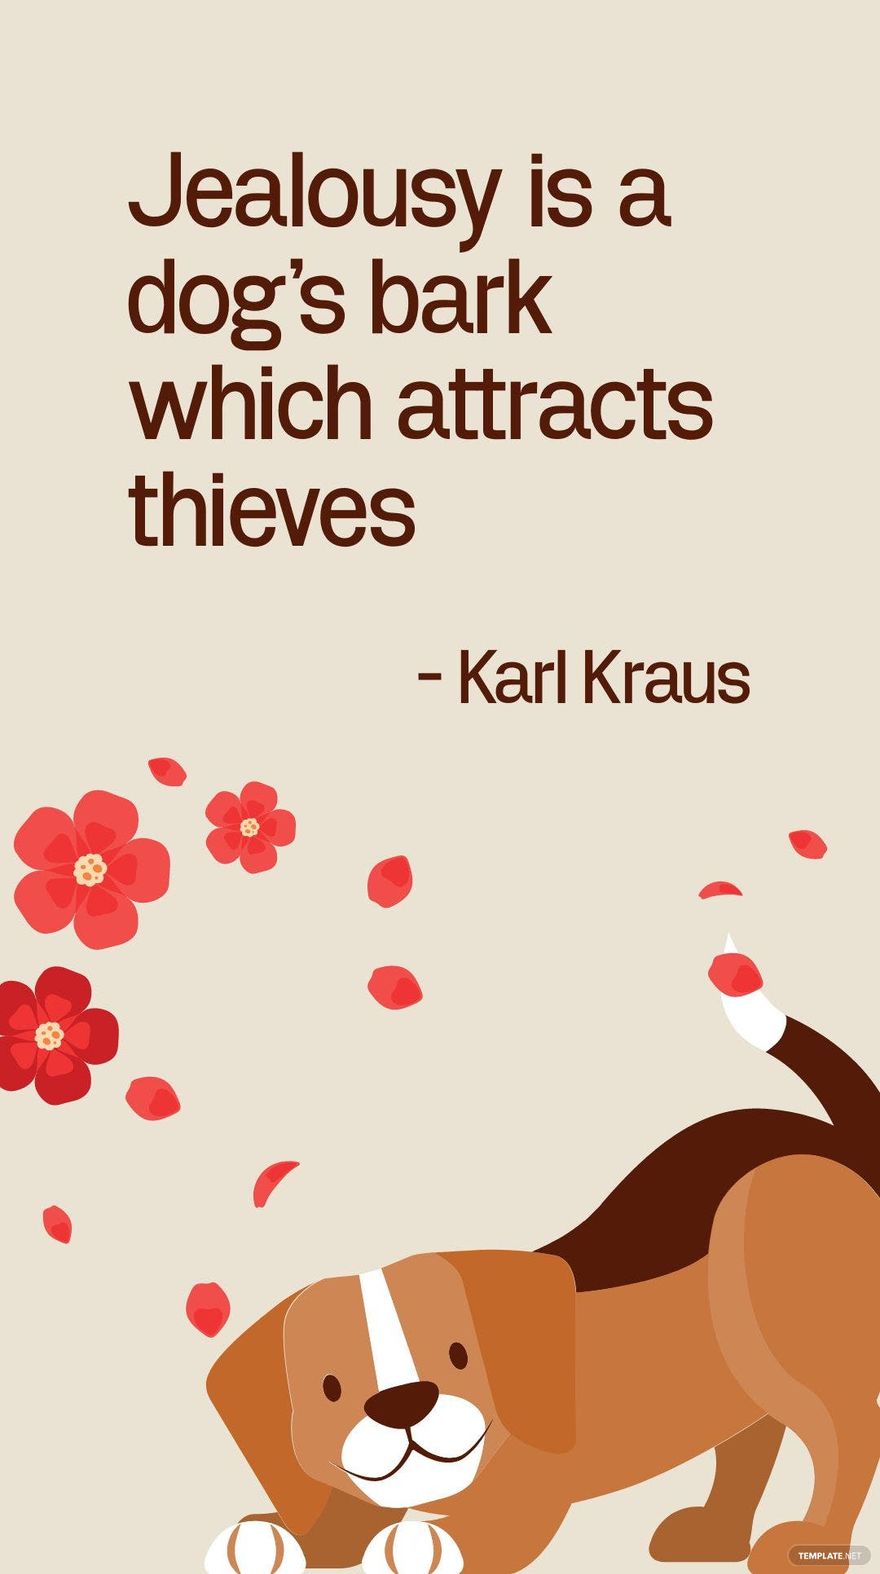 Karl Kraus - Jealousy is a dog's bark which attracts thieves